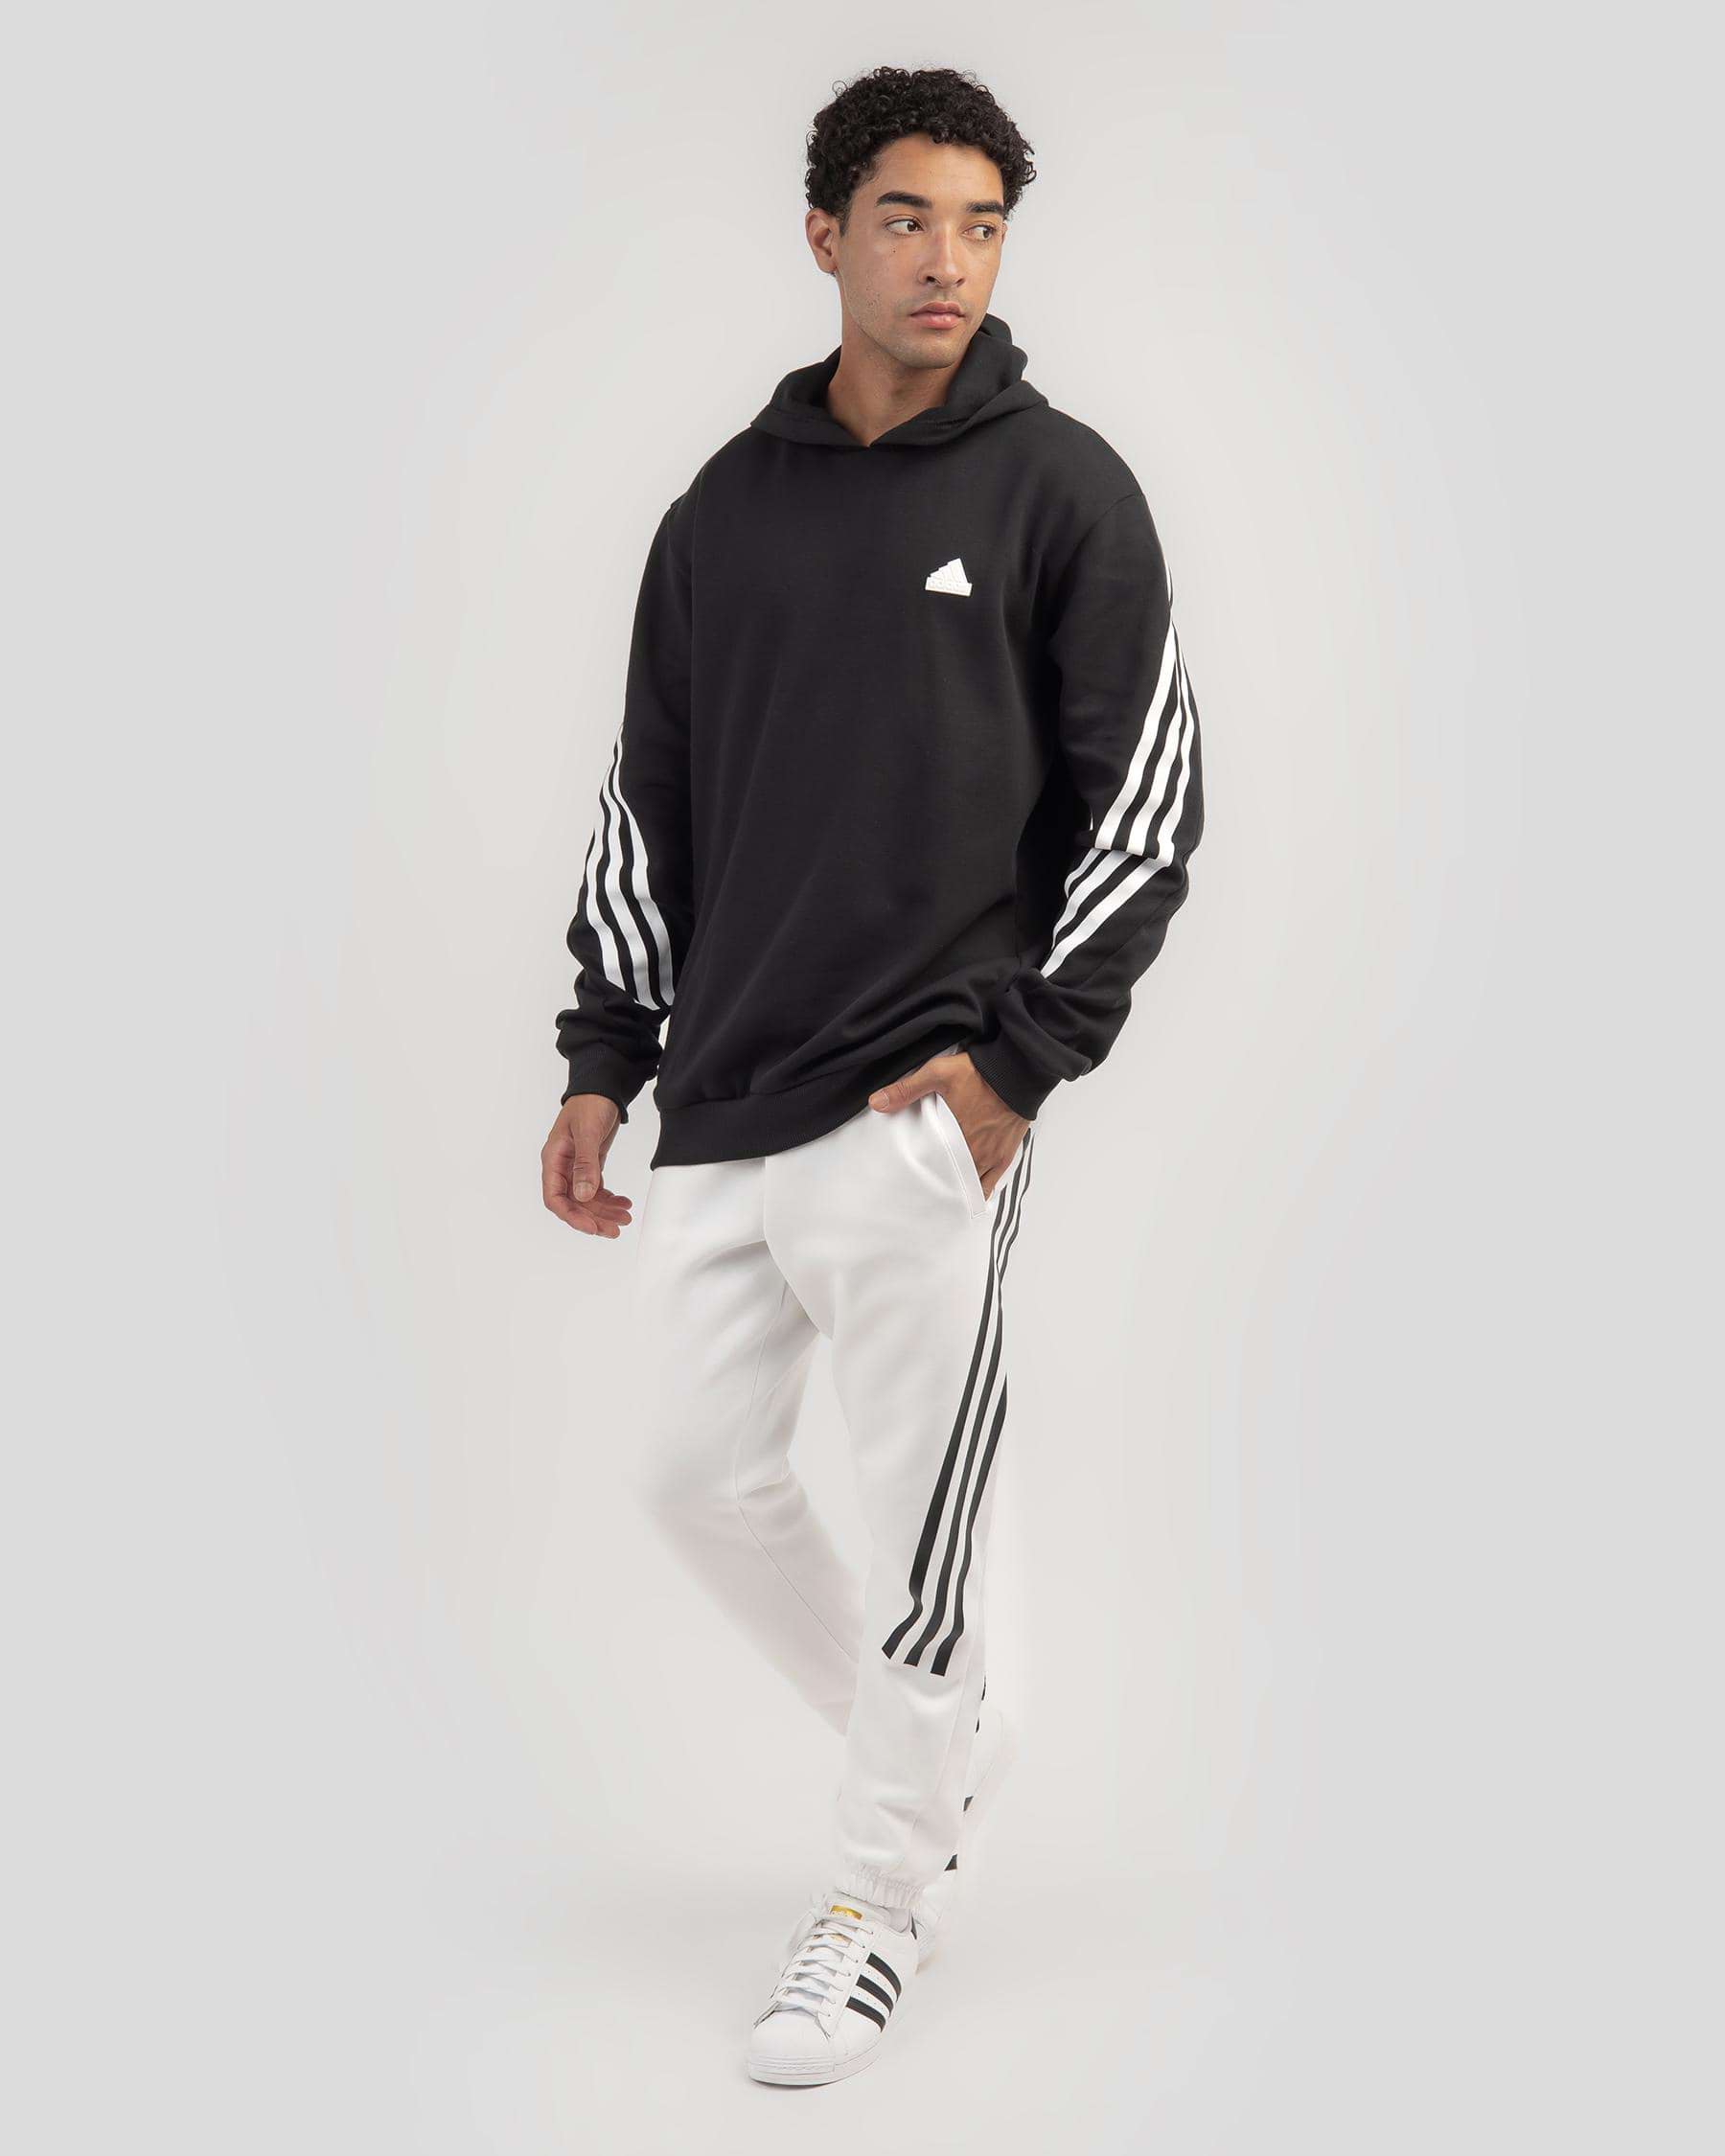 Adidas Future Icons 3 Stripe Hoodie In Black/white - Fast Shipping ...